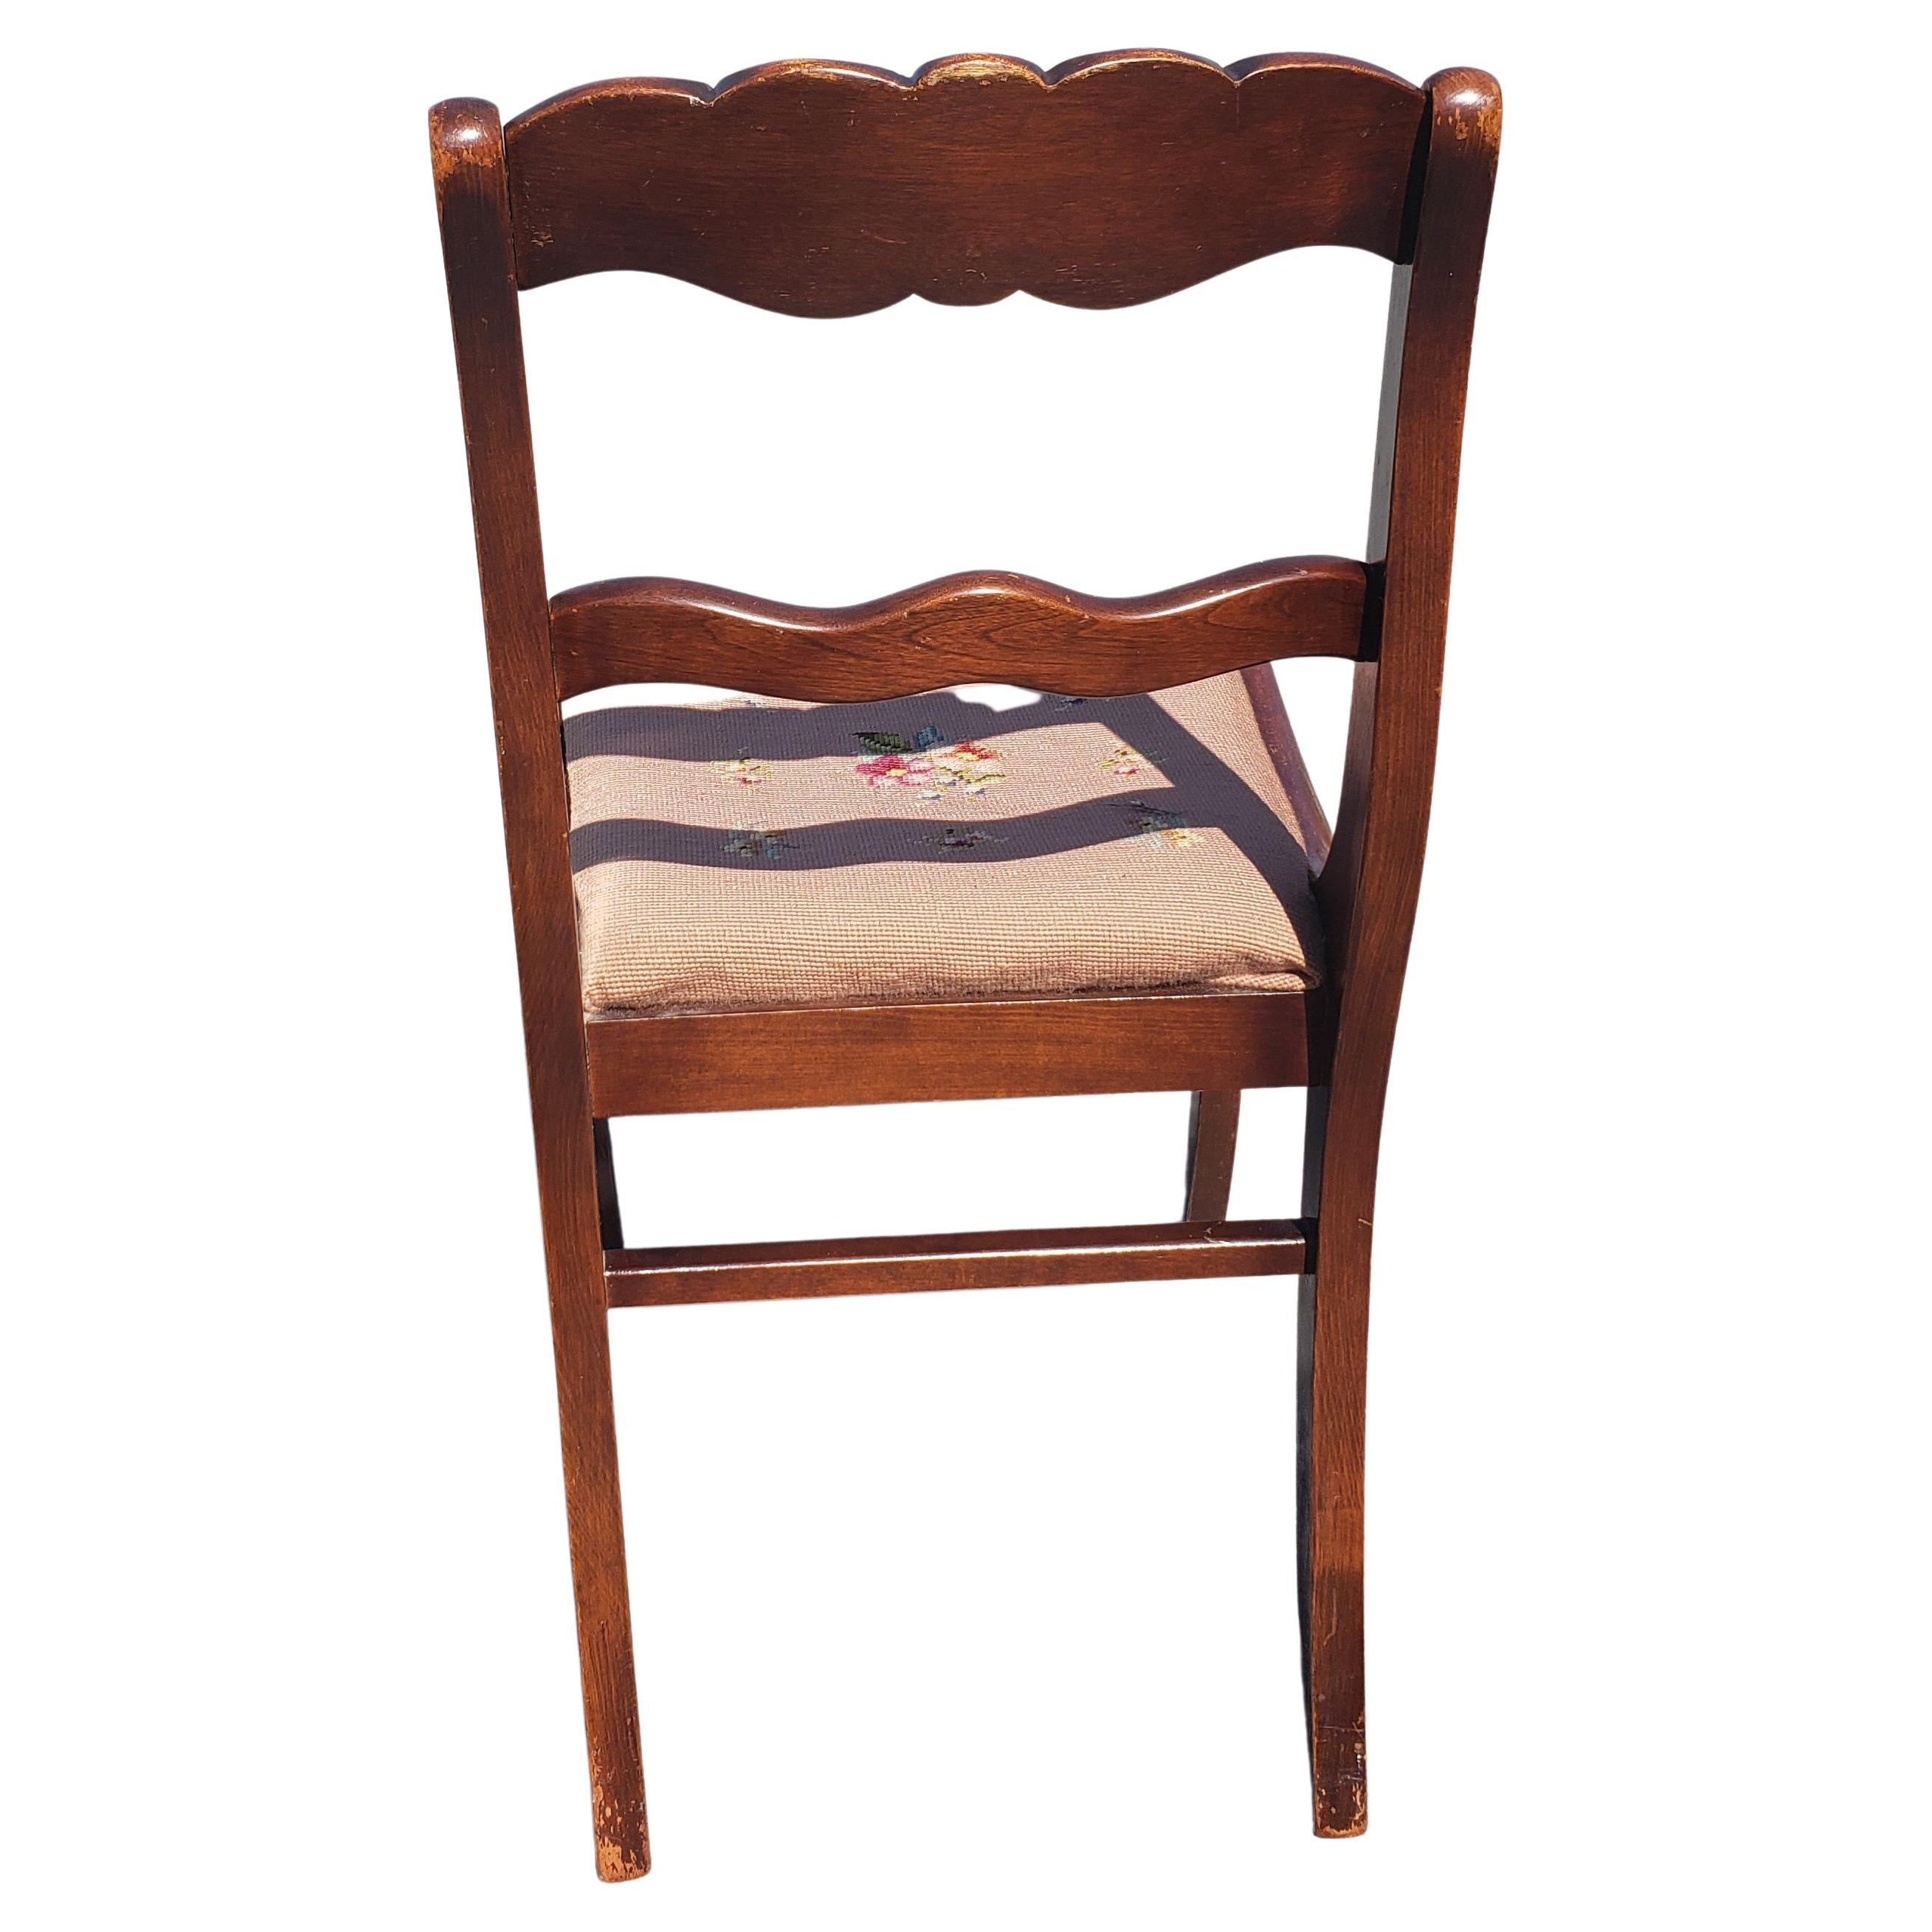 A set of four 1940’s Tell City Chair Company mahogany Duncan Phyfe rose back chair with needlepoint seat 
Measures 17.5